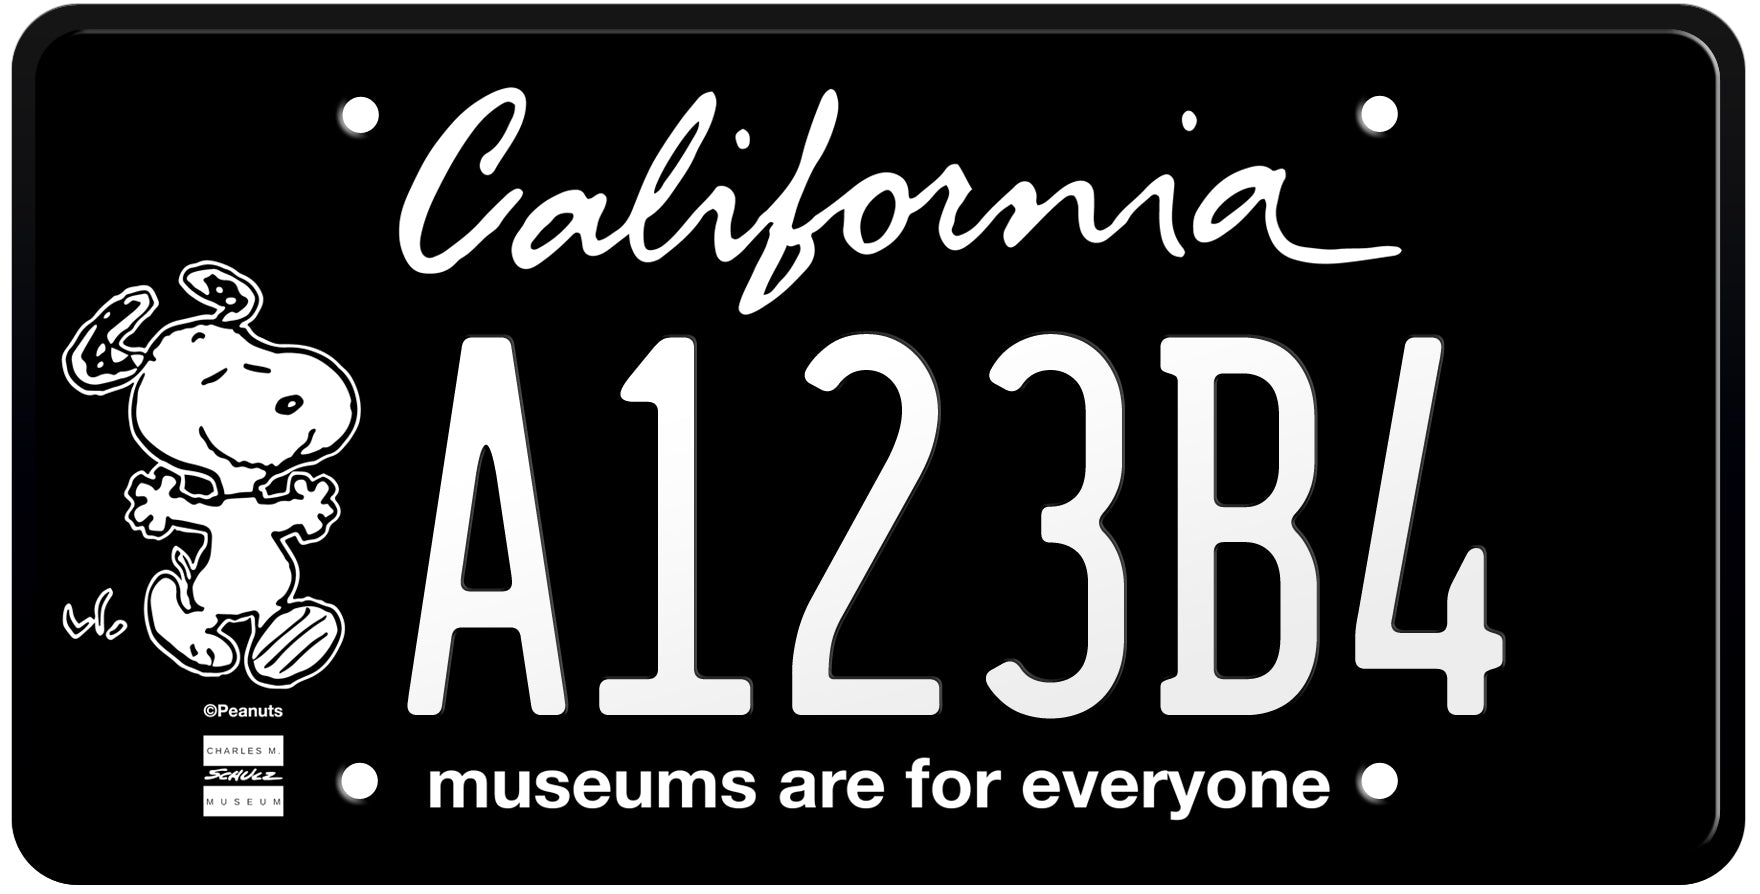 CALIFORNIA MUSEUMS ARE FOR EVERYONE LICENSE PLATE - BLACK WITH WHITE TEXT B  6x12 (156.5mm x 305mm)